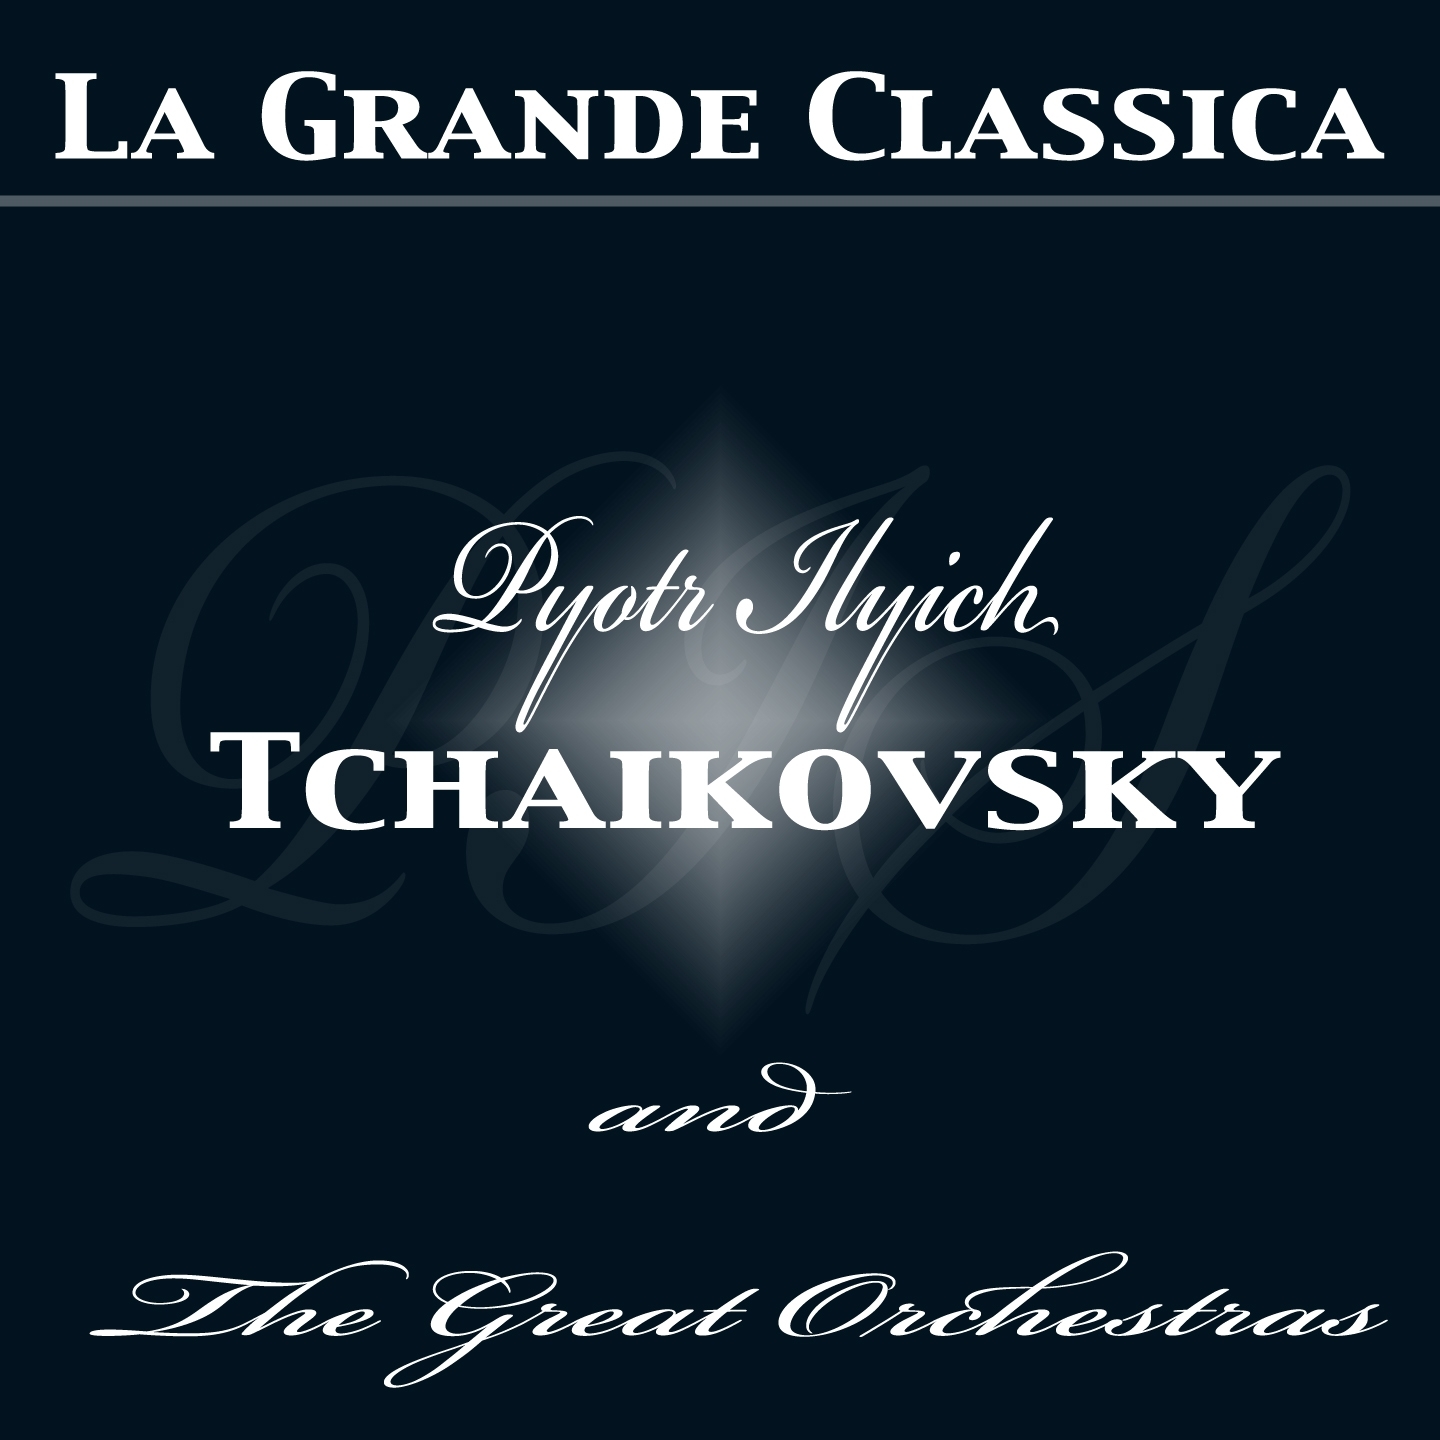 Tchaikovsky and the Great Orchestras, Vol. 1